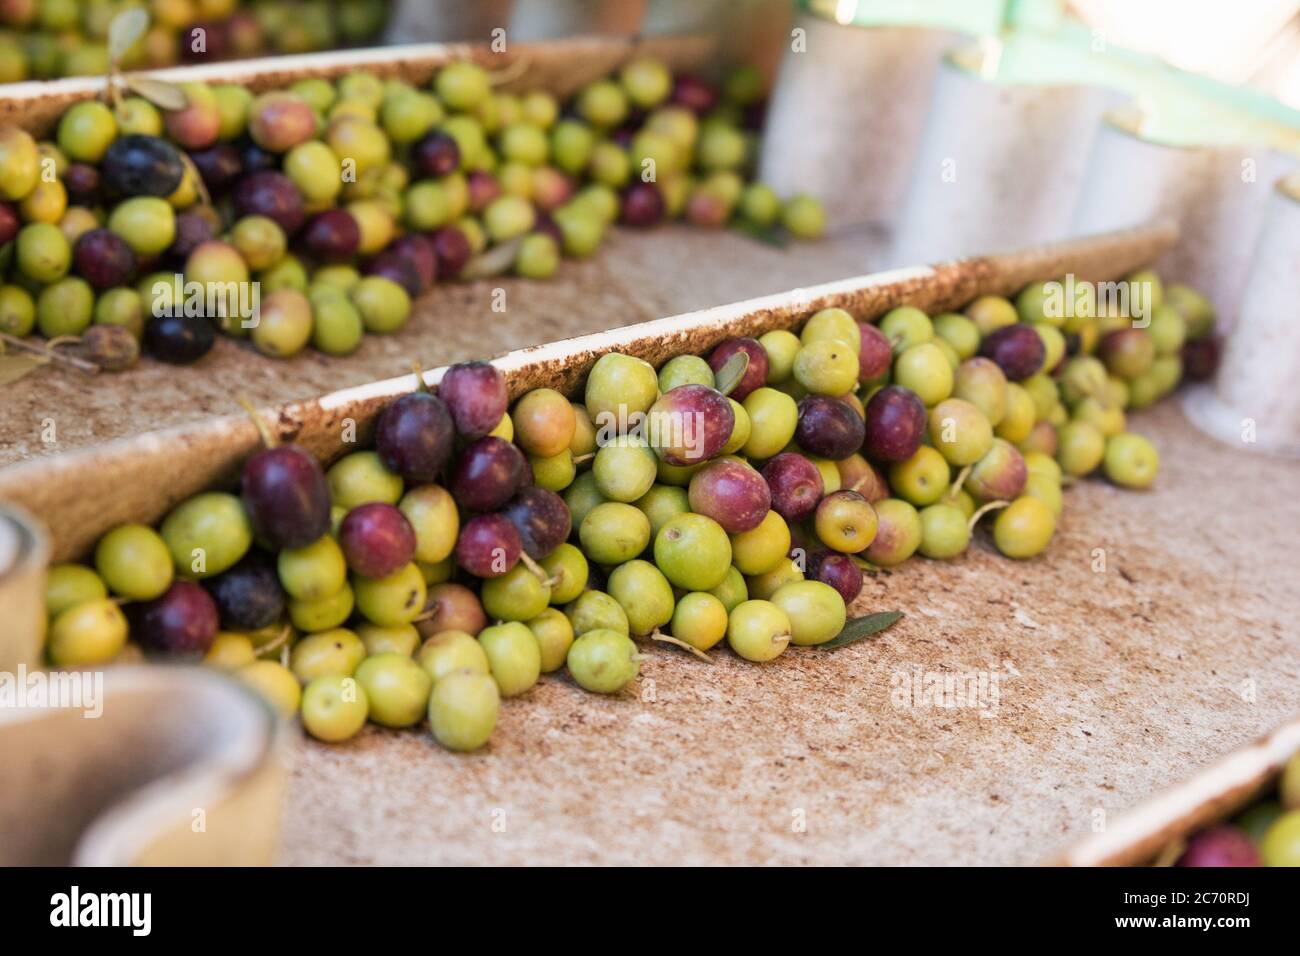 Stock photo of a conveyor belt with lots of olives. Machinery and part of the olive oil extraction process Stock Photo